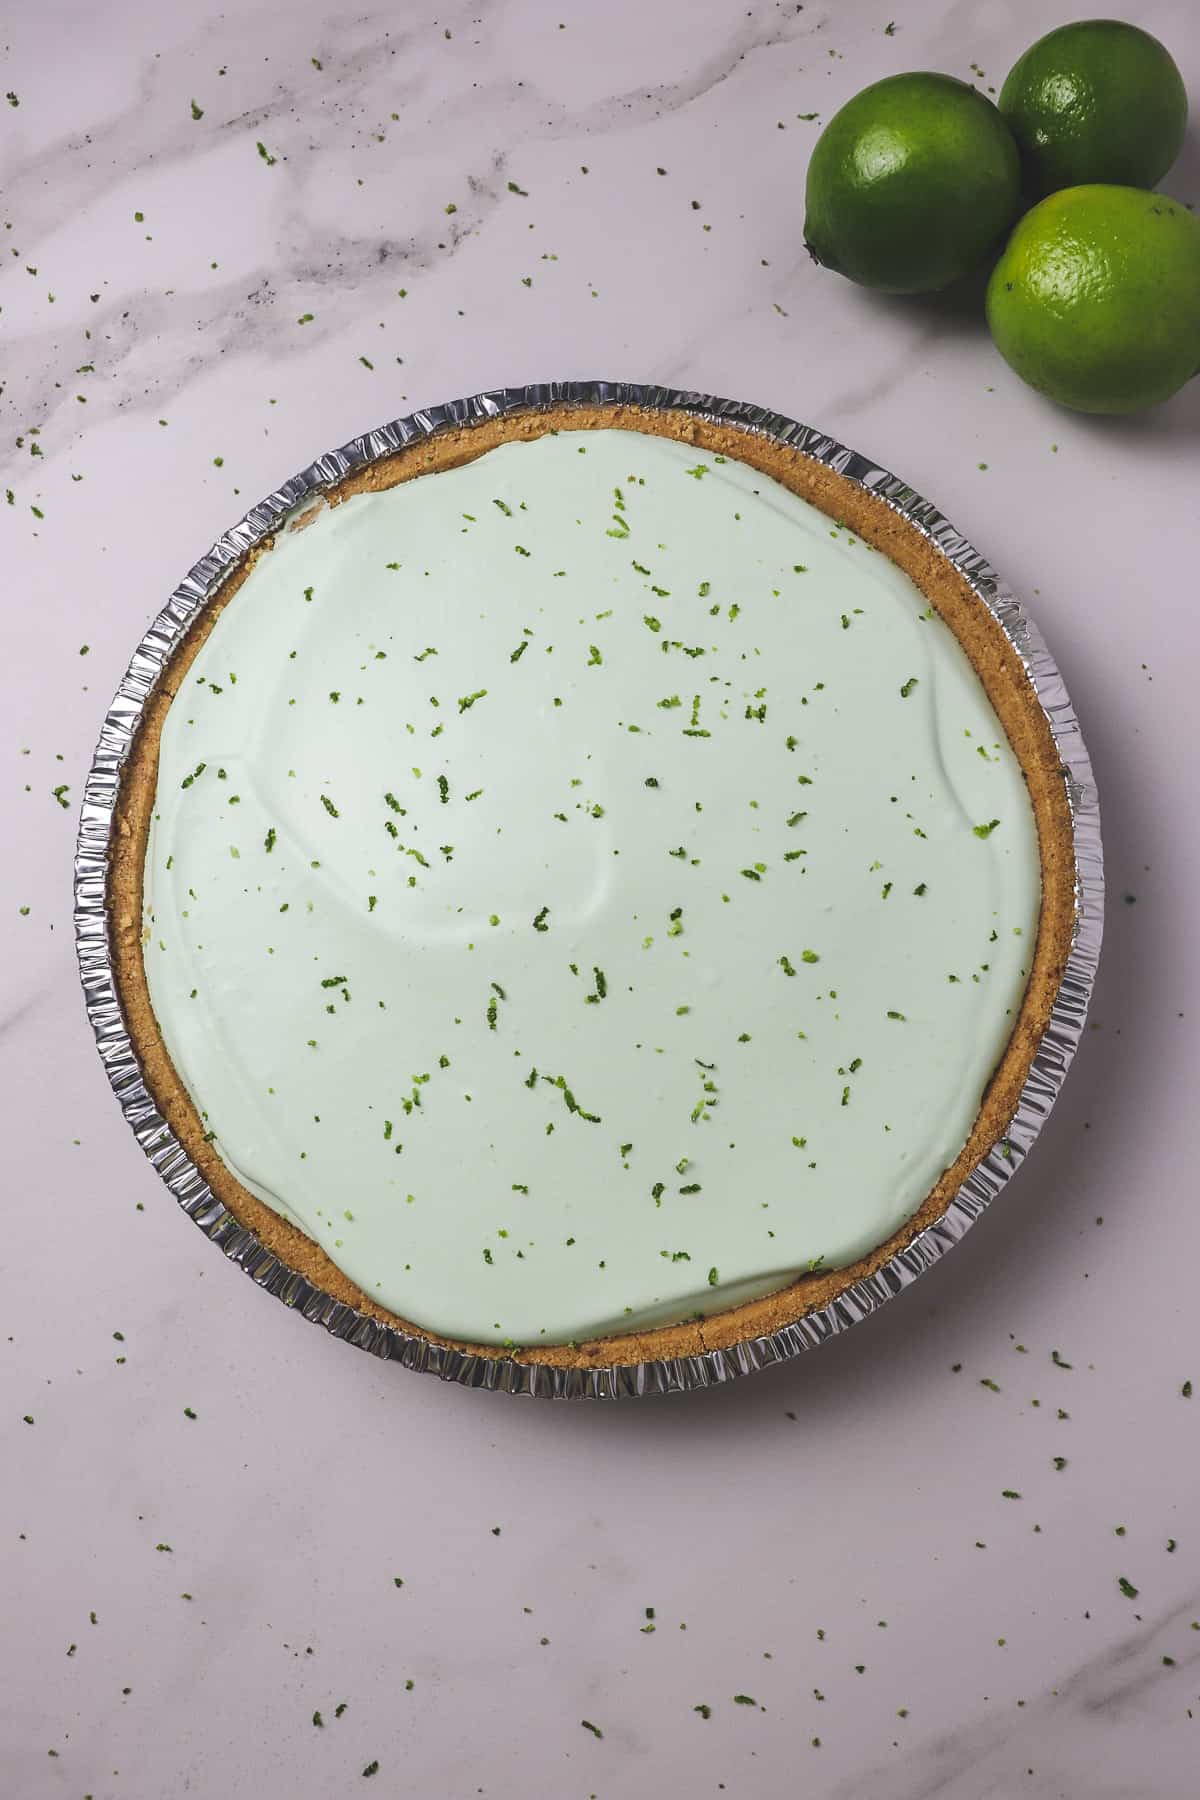 finished no-bake key lime pie with lime zest on top and 3 limes